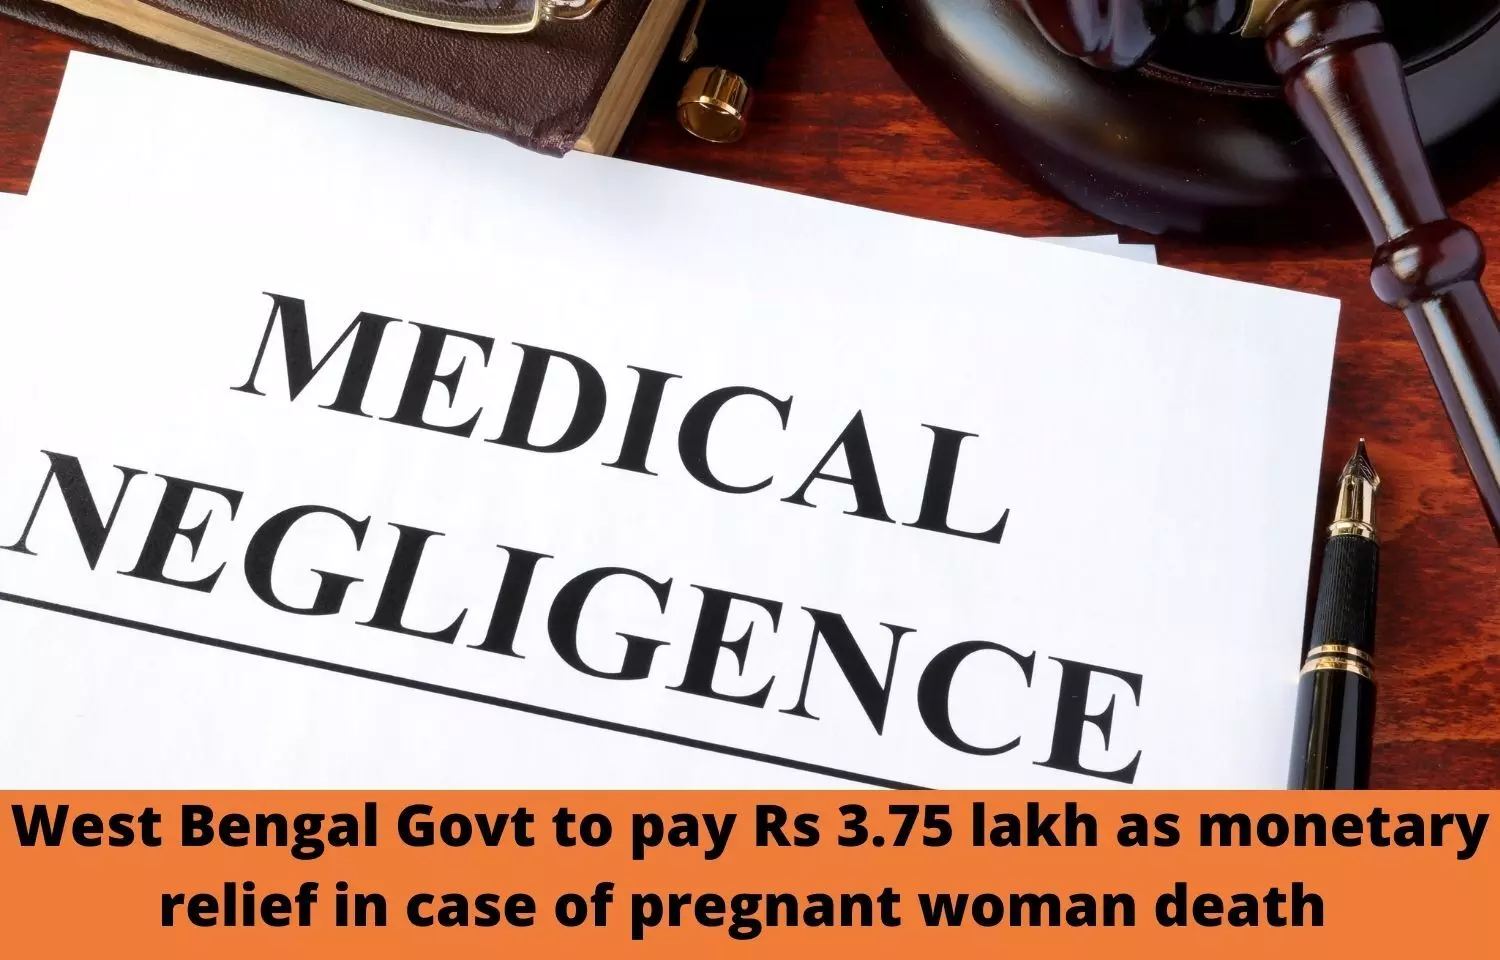 West Bengal Govt to pay Rs 3.75 lakh as monetary relief in case of pregnant woman death due to medical negligence